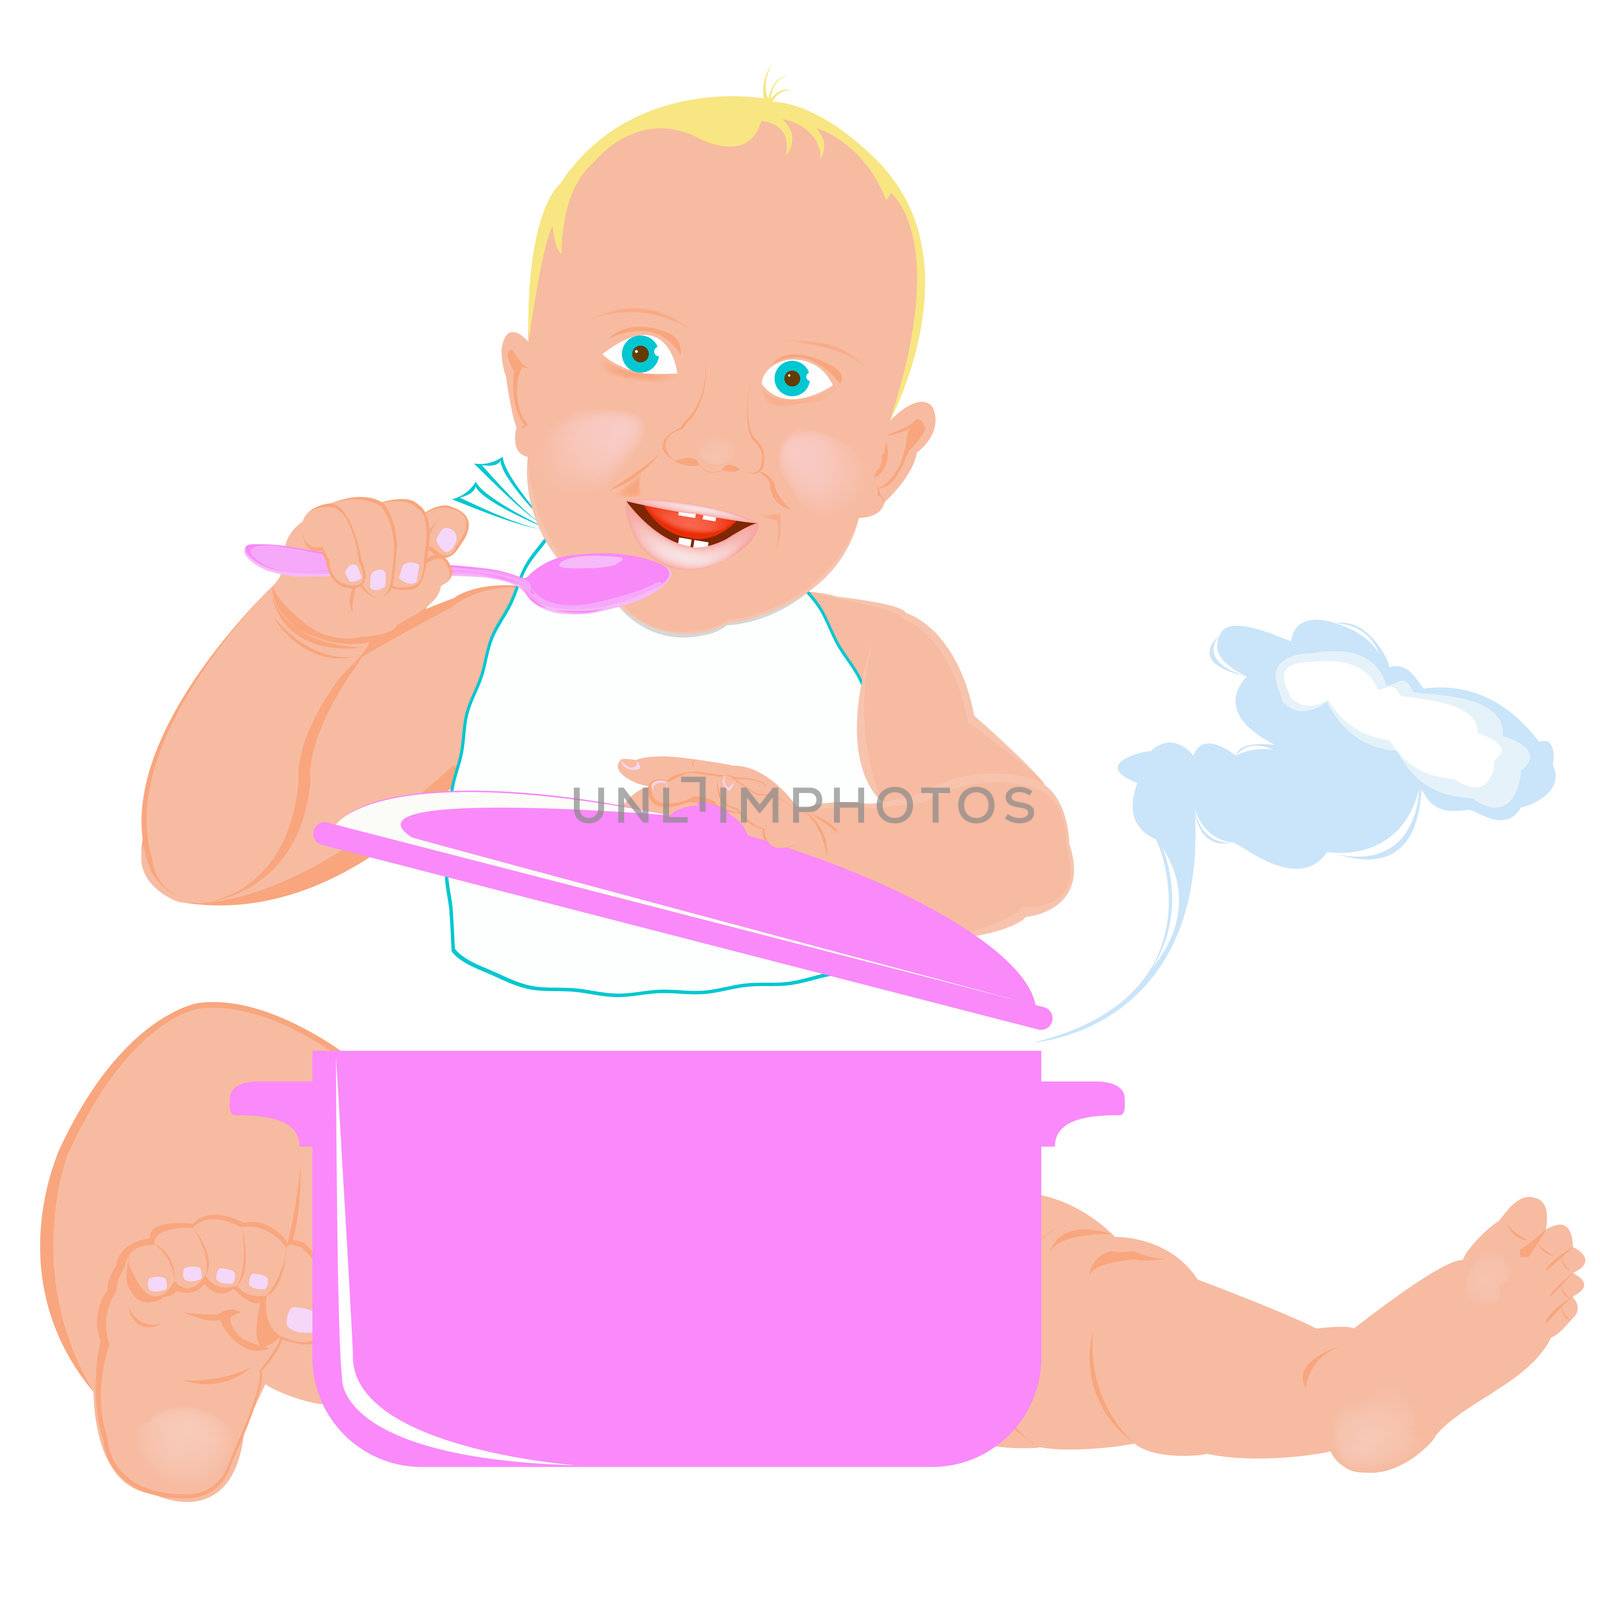 Healthy nutrition food for baby by sergey150770SV